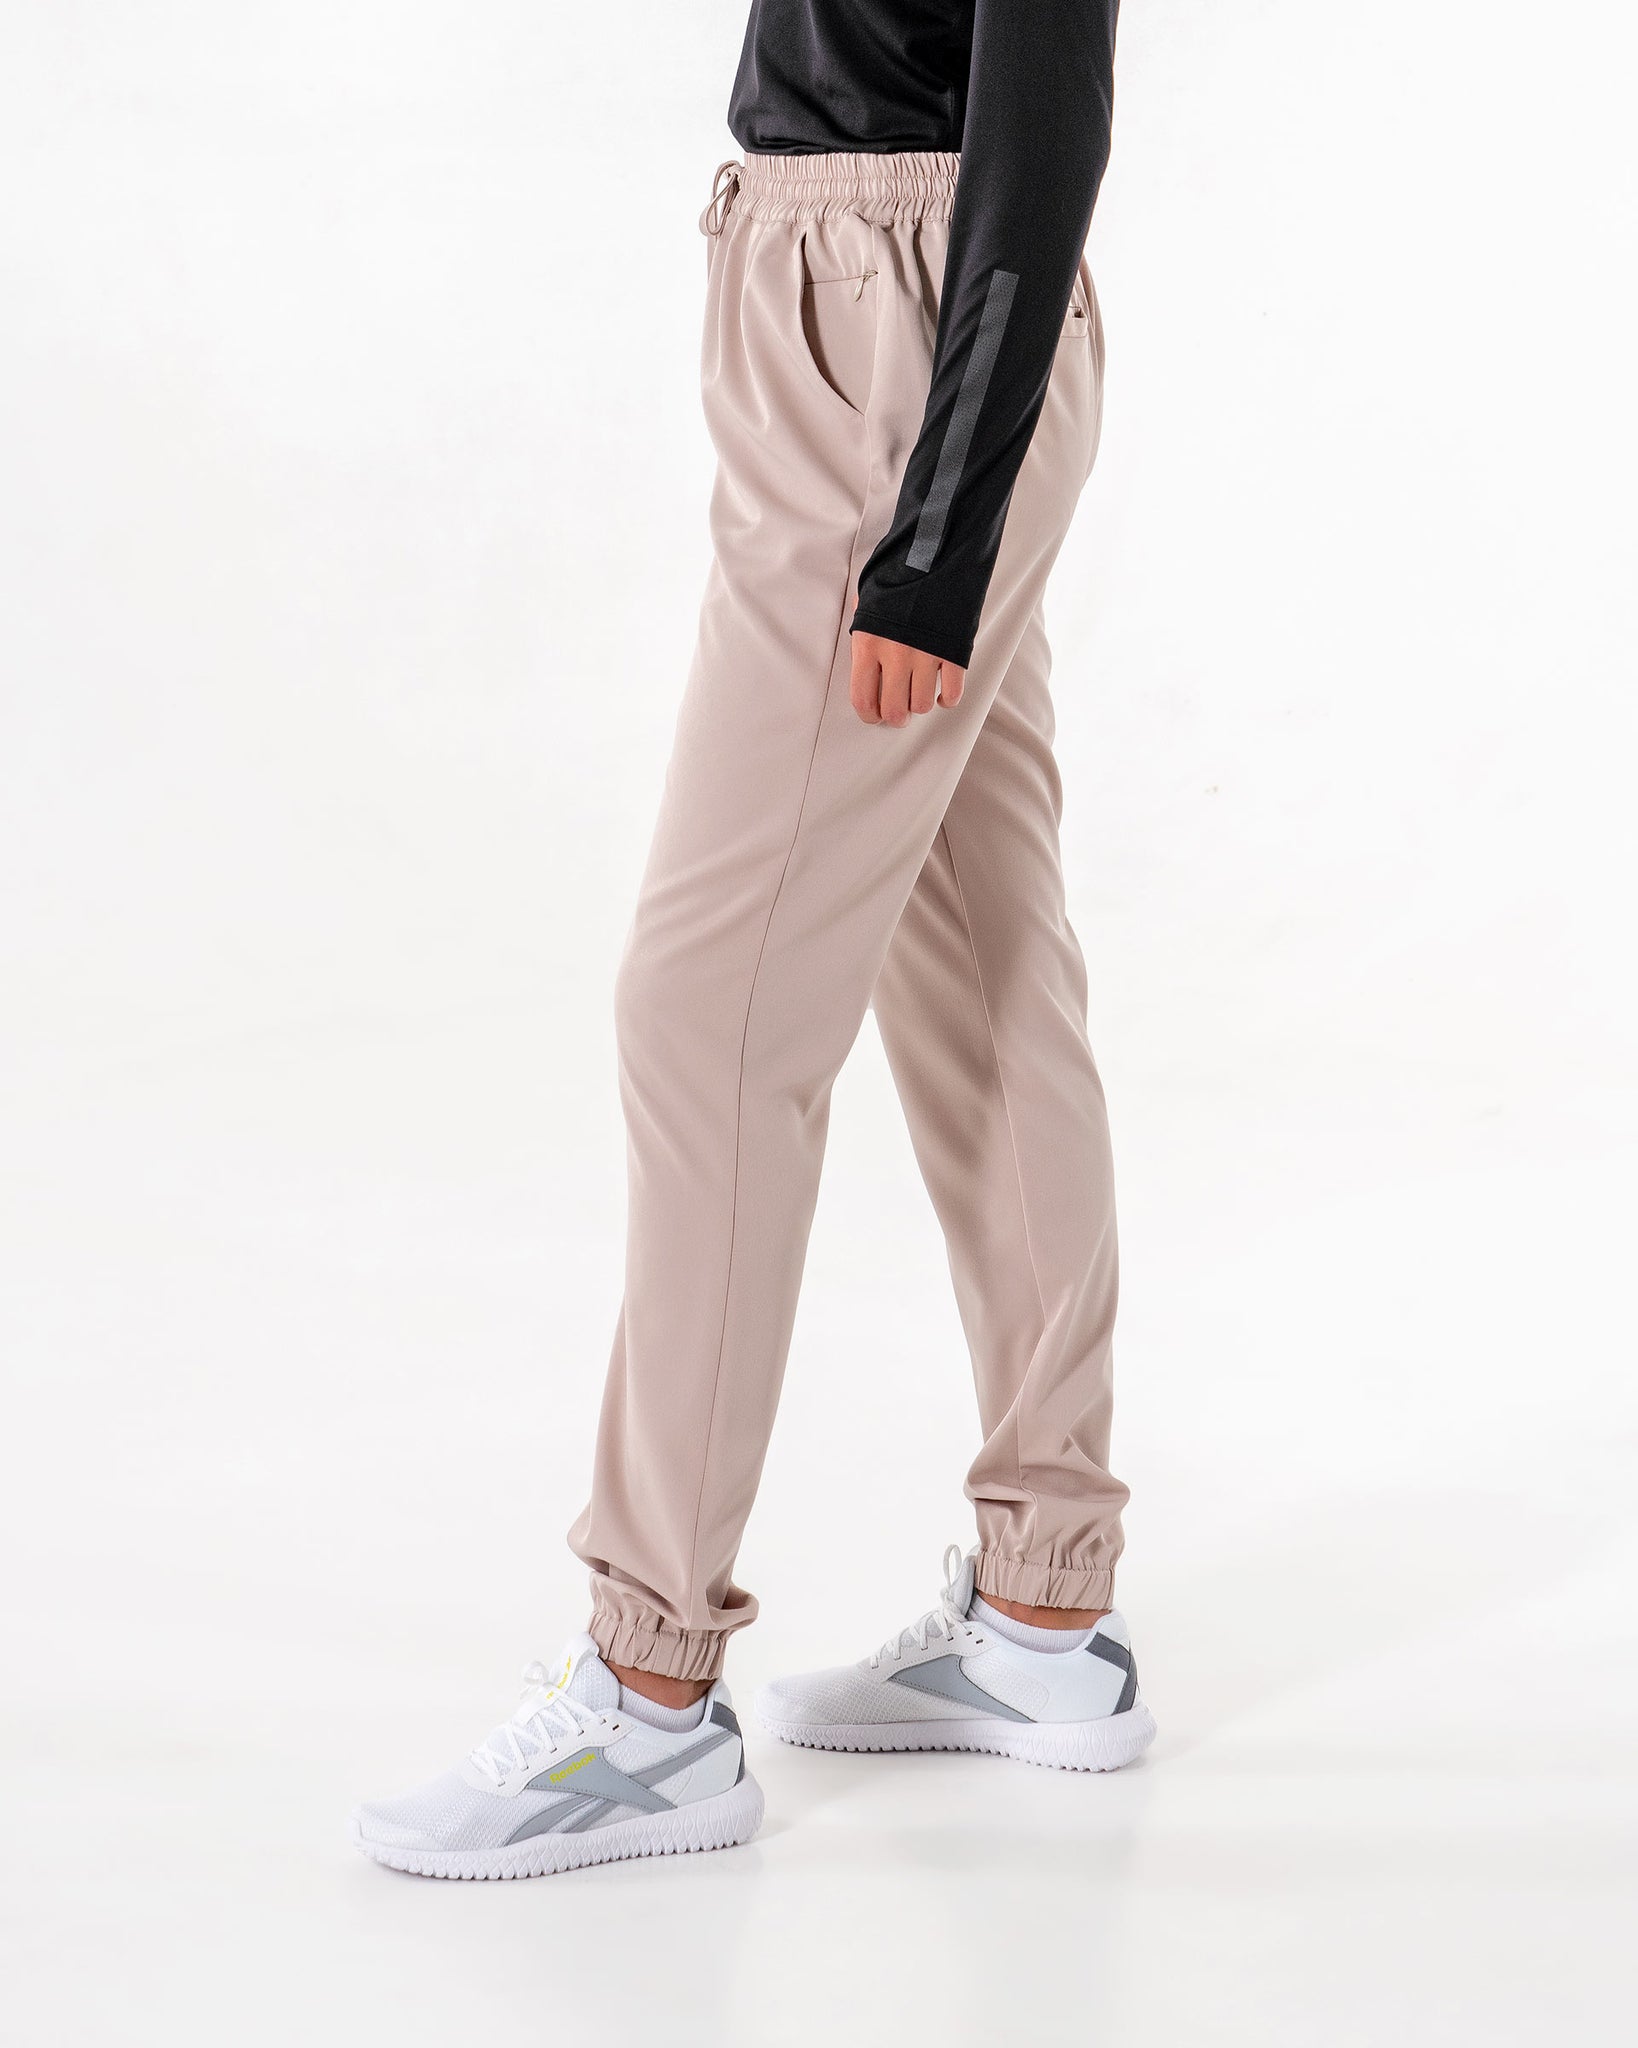 Glider Drawstring Jogger in beige by Veil Garments. Modest activewear collection.